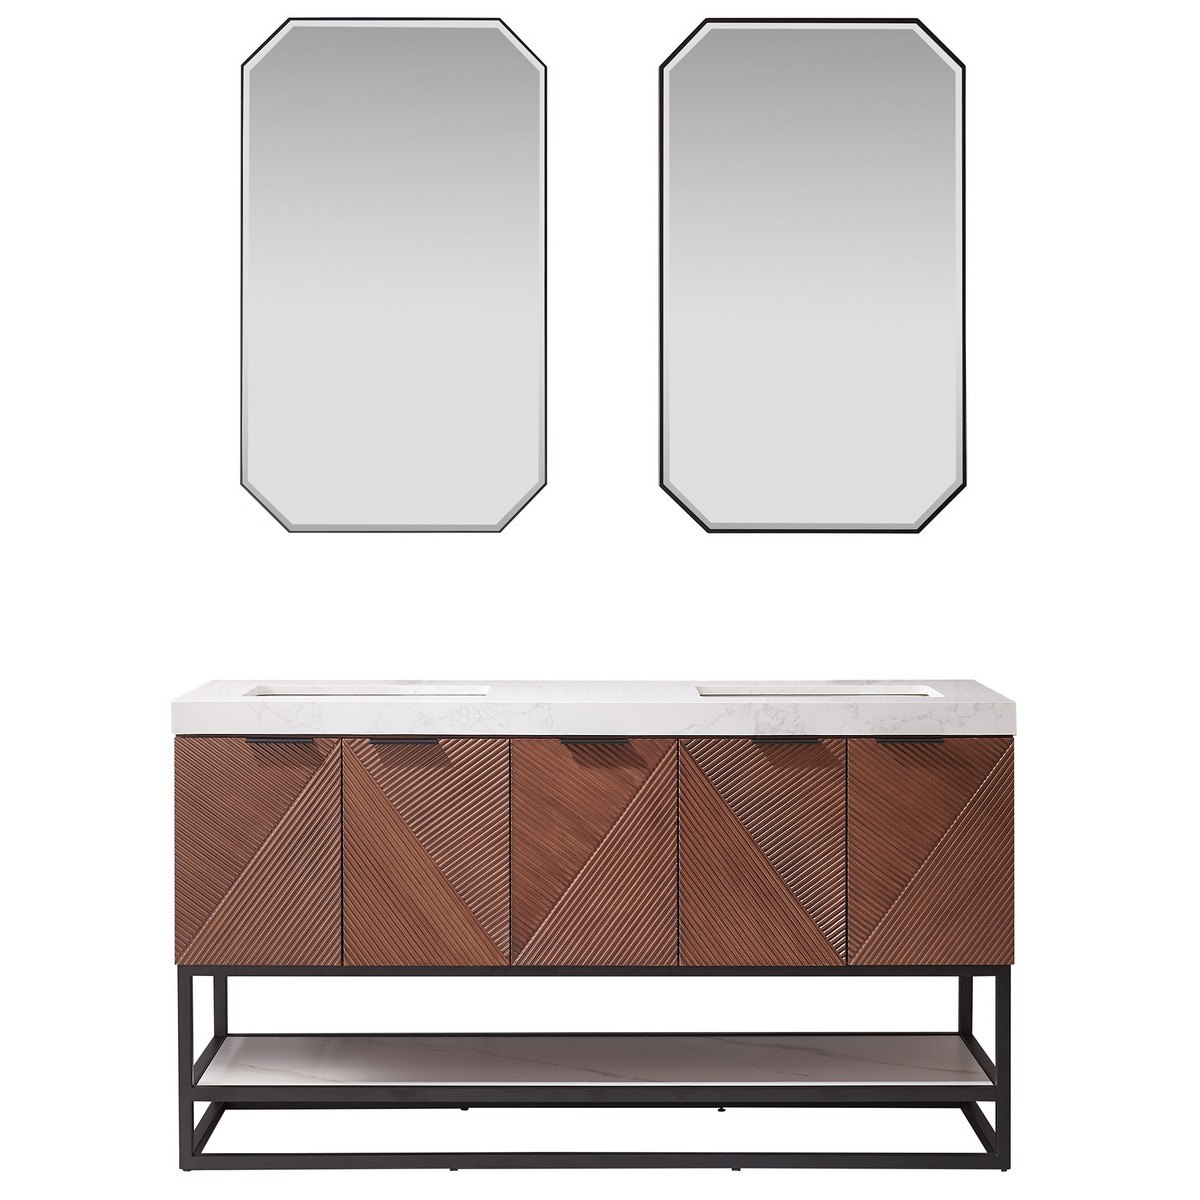 VINNOVA 703560M-ND-GW MAHON 60 INCH FREESTANDING DOUBLE SINK BATHROOM VANITY IN NORTH AMERICAN DEEP WALNUT WITH WHITE GRAIN COMPOSITE STONE TOP